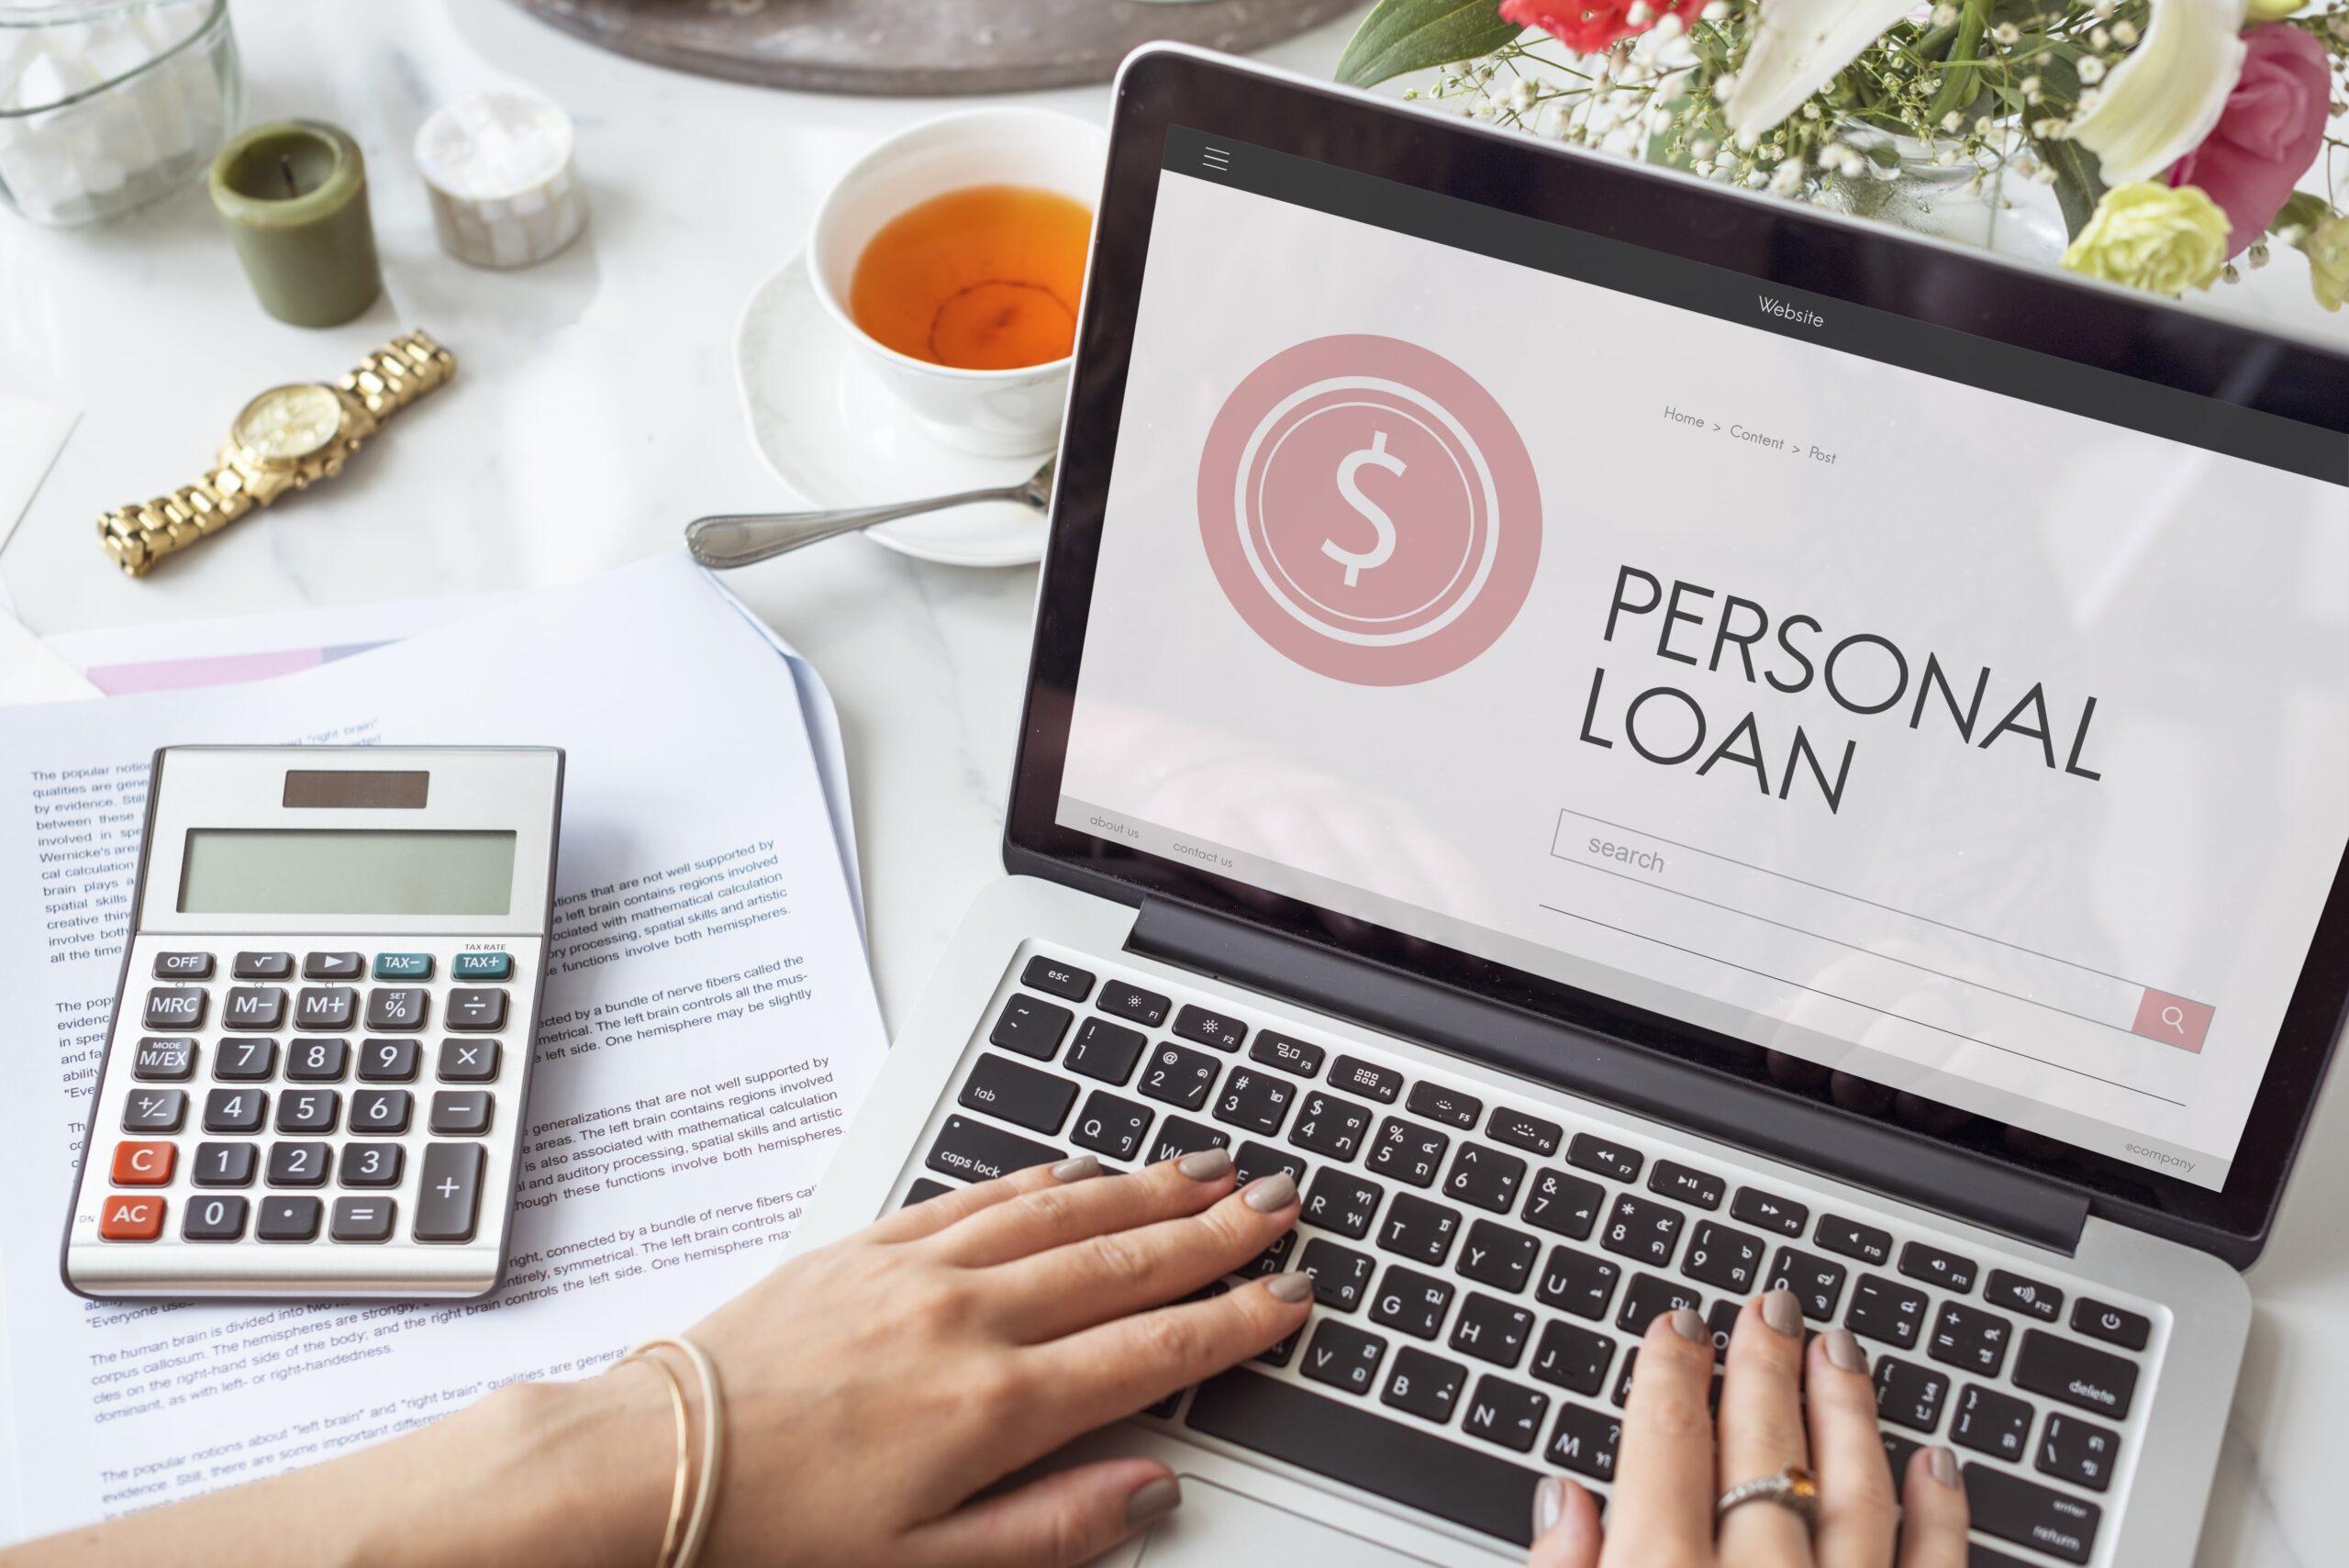 personal loan interest rate